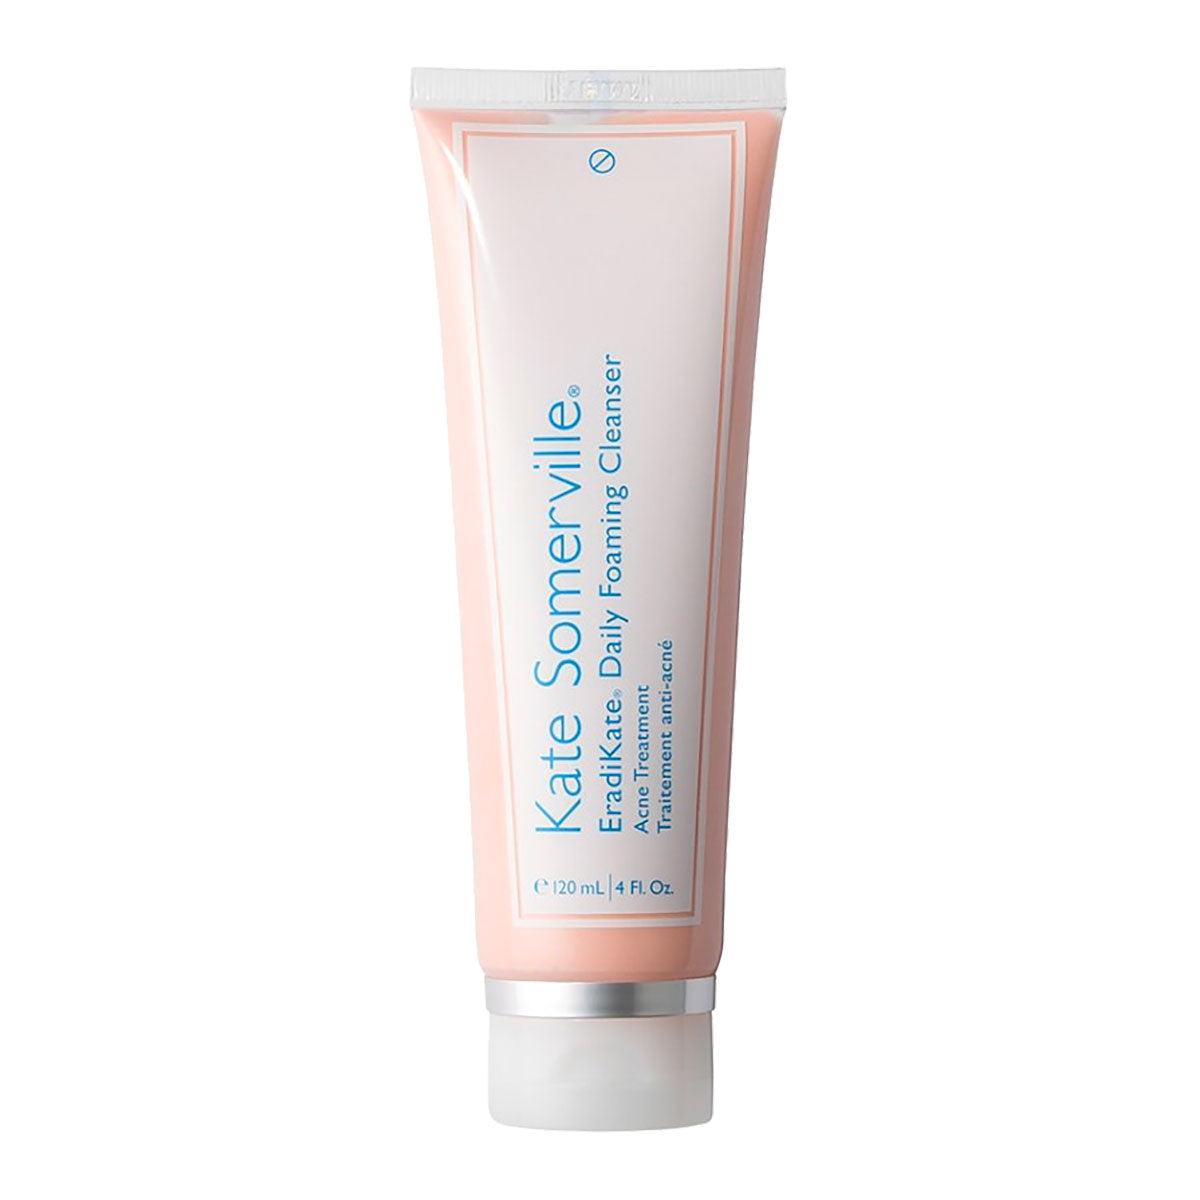 Kate Somerville Daily Foaming Cleanser Acne Treatment 120 ml